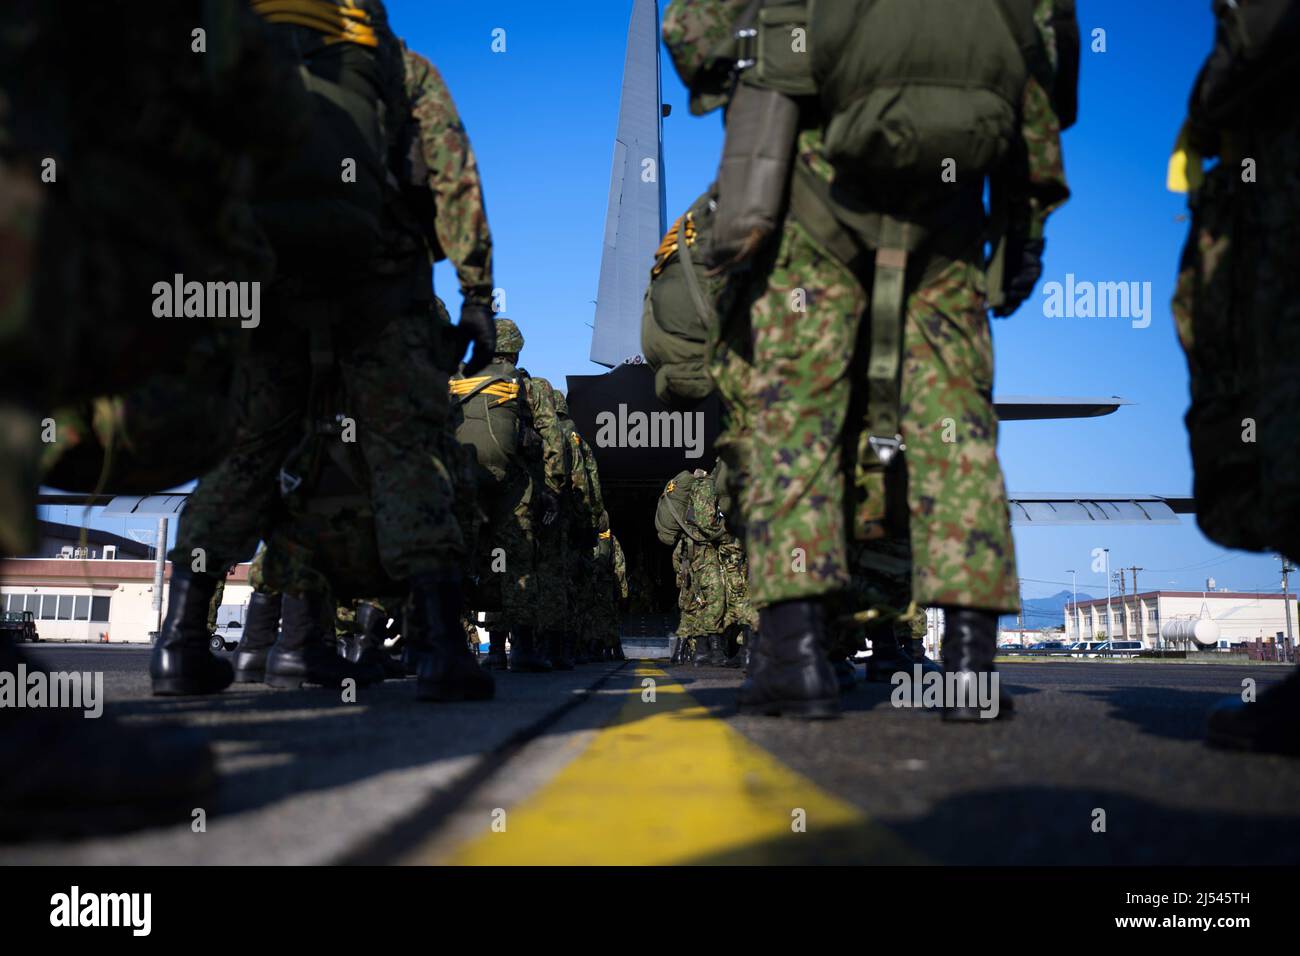 Japan Ground Self-Defense Force 1st Airborne Brigade soldiers line up on the flightline at Yokota Air Base, Japan, during a bilateral jump training with the 36th Airlift Squadron, April 19, 2022. The goal of this event is to improve interoperability between the USAF and JGSDF by defense and information exchanges to deepen mutual understanding of each unit, and to further cement the U.S. and Japanese alliance. (U.S. Air Force photo by Tech. Sgt. Gustavo Castillo) Stock Photo